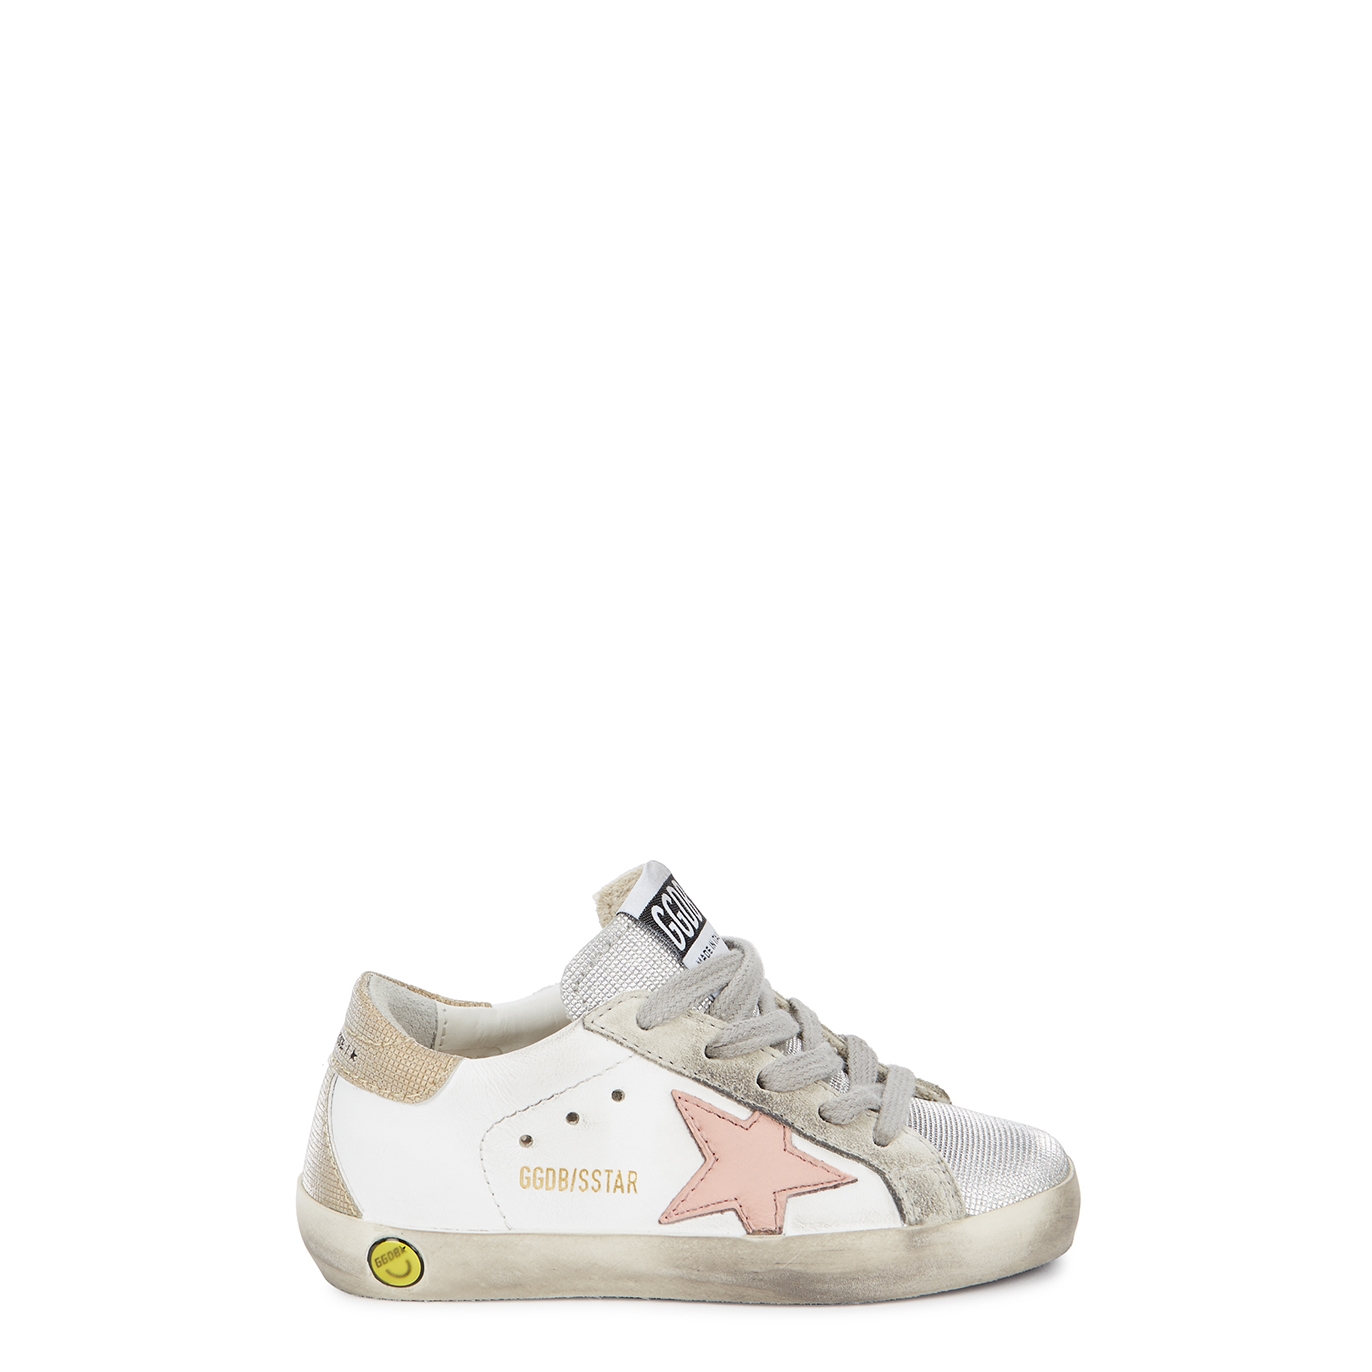 Golden Goose Superstar Glittered Leather Sneakers (IT23-IT27) - White & Other - 7 Baby